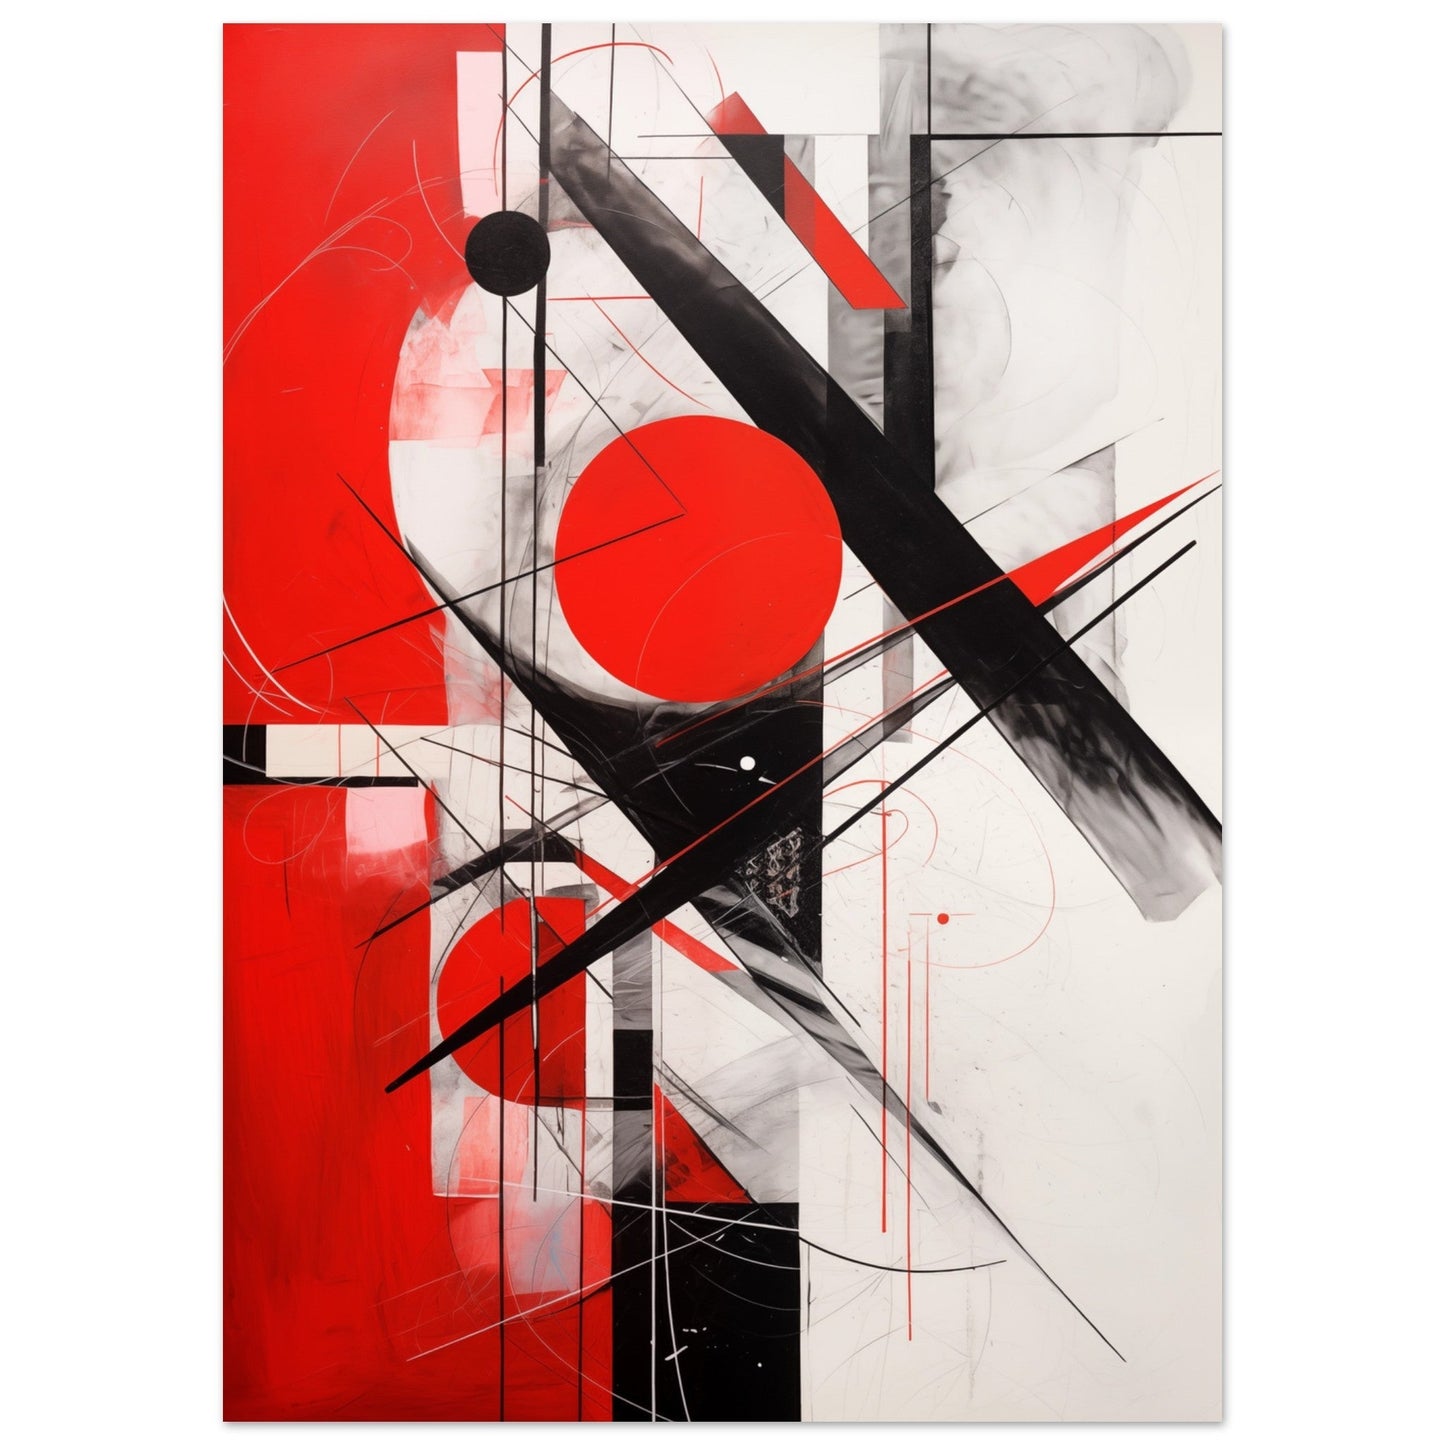 Chaos in the Vivid Divide, a red and black Abstract Art painting on a white background, perfect for wall art.